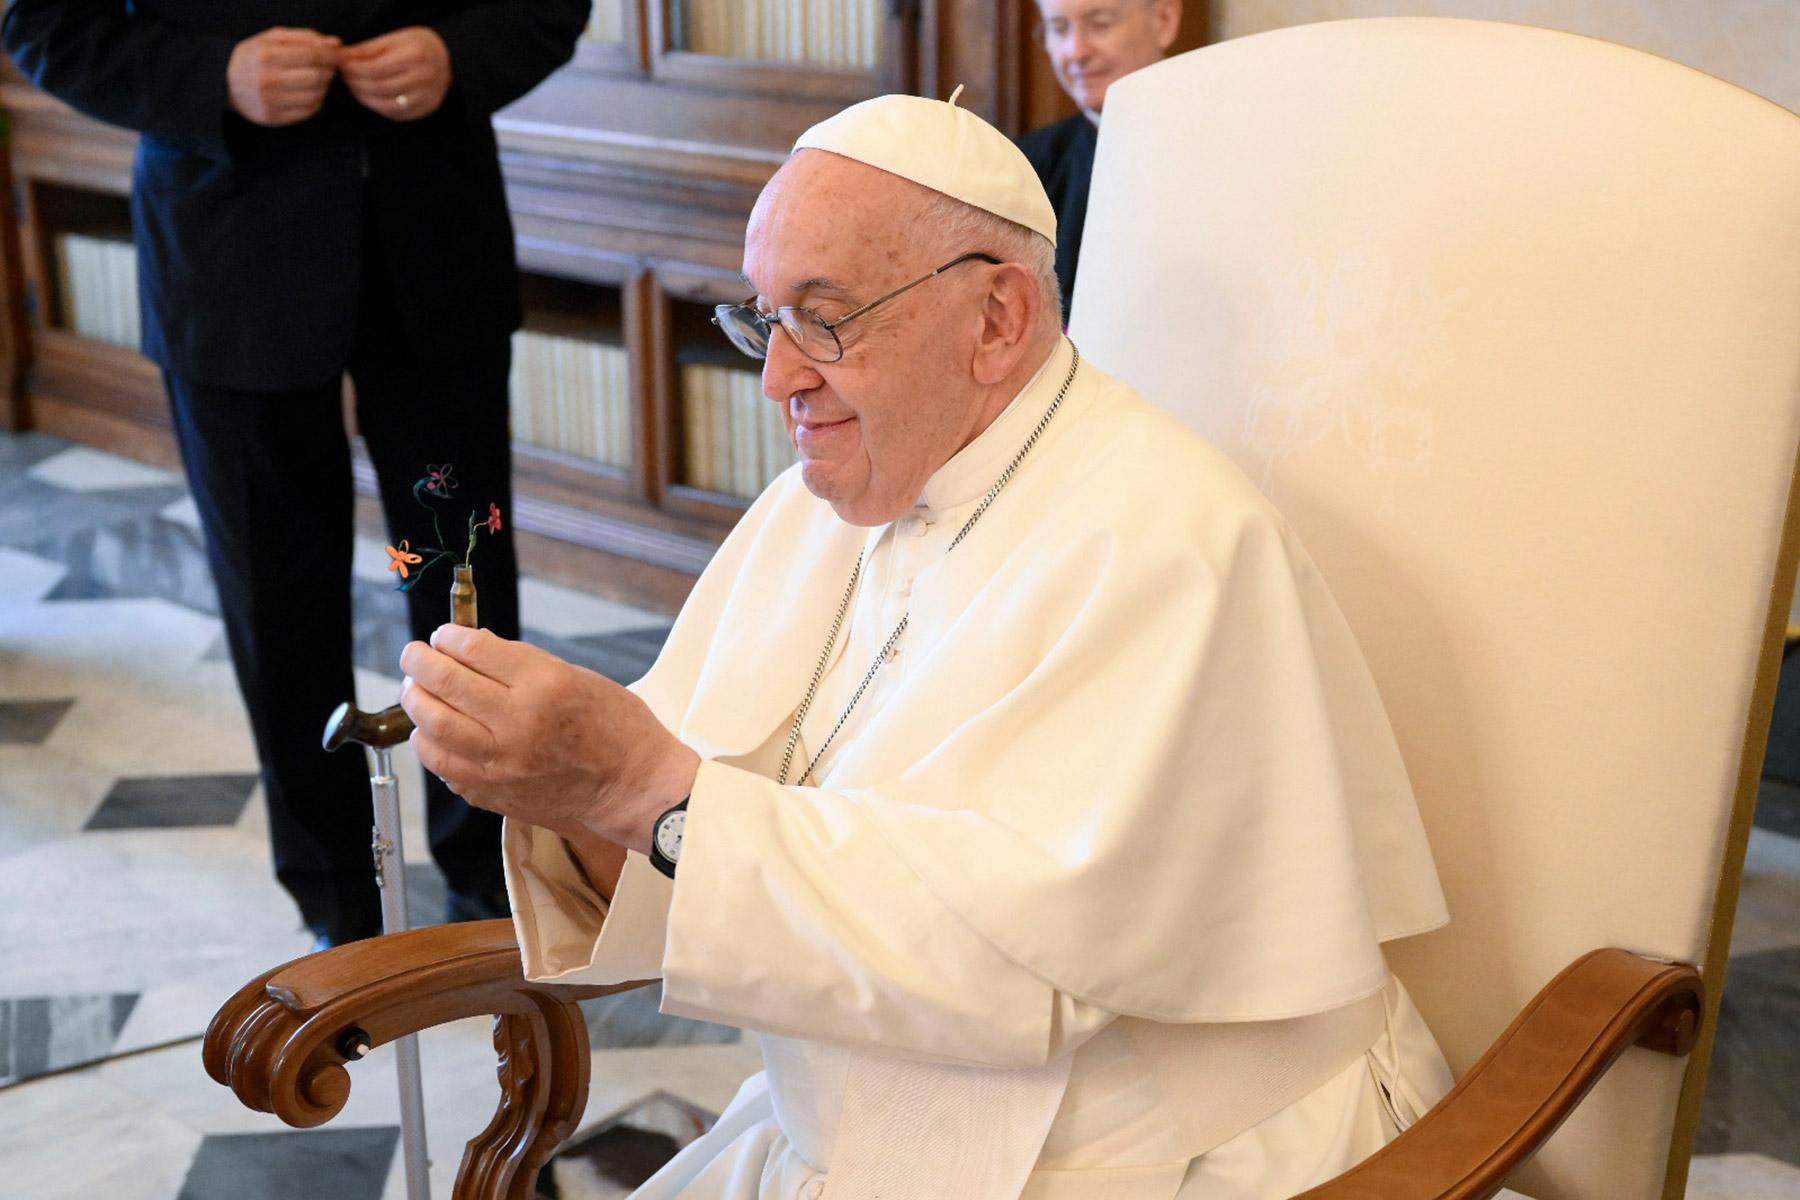 Pope Francis receives “gift of hope” made by Ukrainian children in Lutheran congregation of Kharkiv. Photo: VaticanMedia